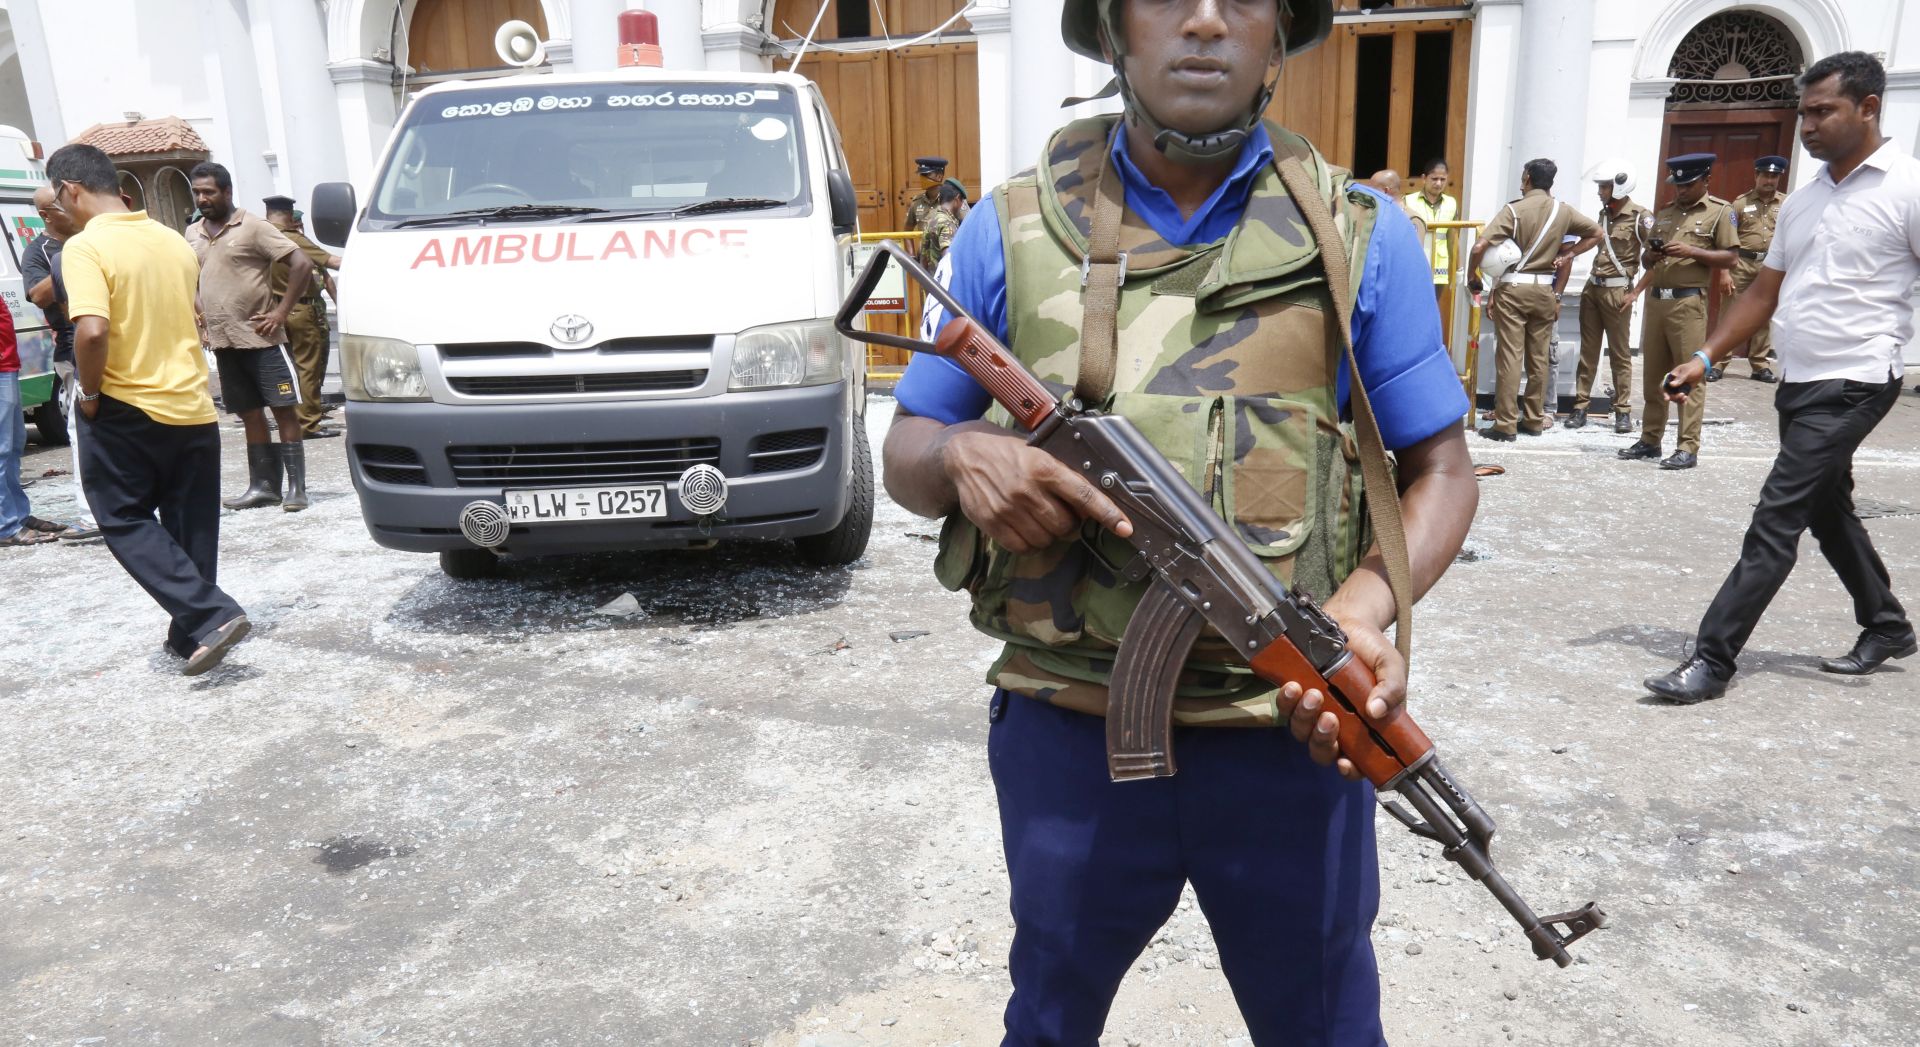 epa07518769 Security personal stand guard after a explosion hit at St Anthony's Church in Kochchikade in Colombo, Sri Lanka, 21 April 2019. According to the news reports at least 25 people killed and over 200 injured in a series of blasts during the Easter Sunday service at St Anthony's Church in Kochchikade and explosions also reported at the Shangri-La Hotel and Kingsbury Hotel.  EPA/M.A. PUSHPA KUMARA